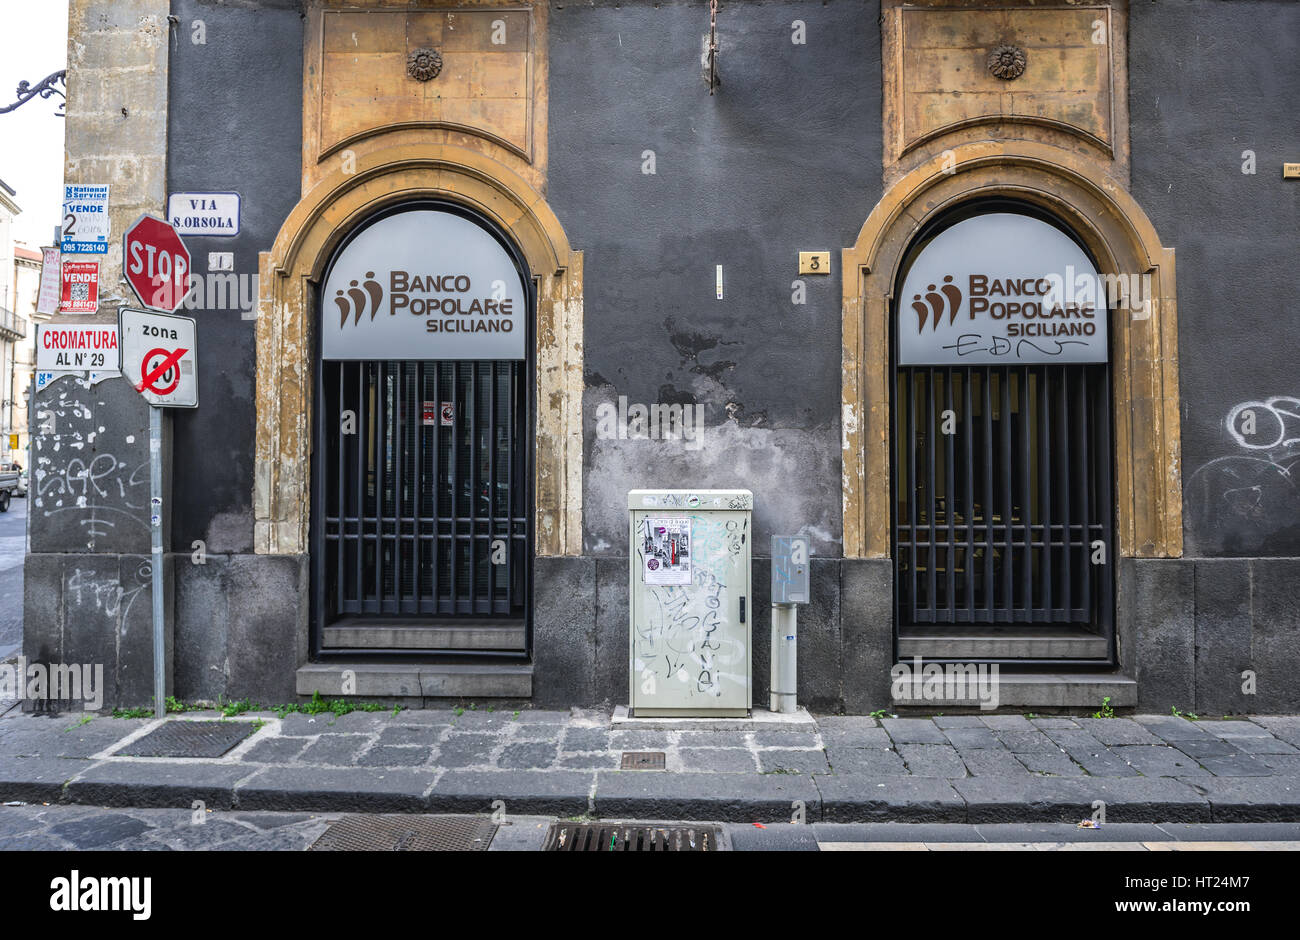 Banco Popolare Siciliano (BMP bank) in Catania city on the east side of  Sicily Island, Italy Stock Photo - Alamy